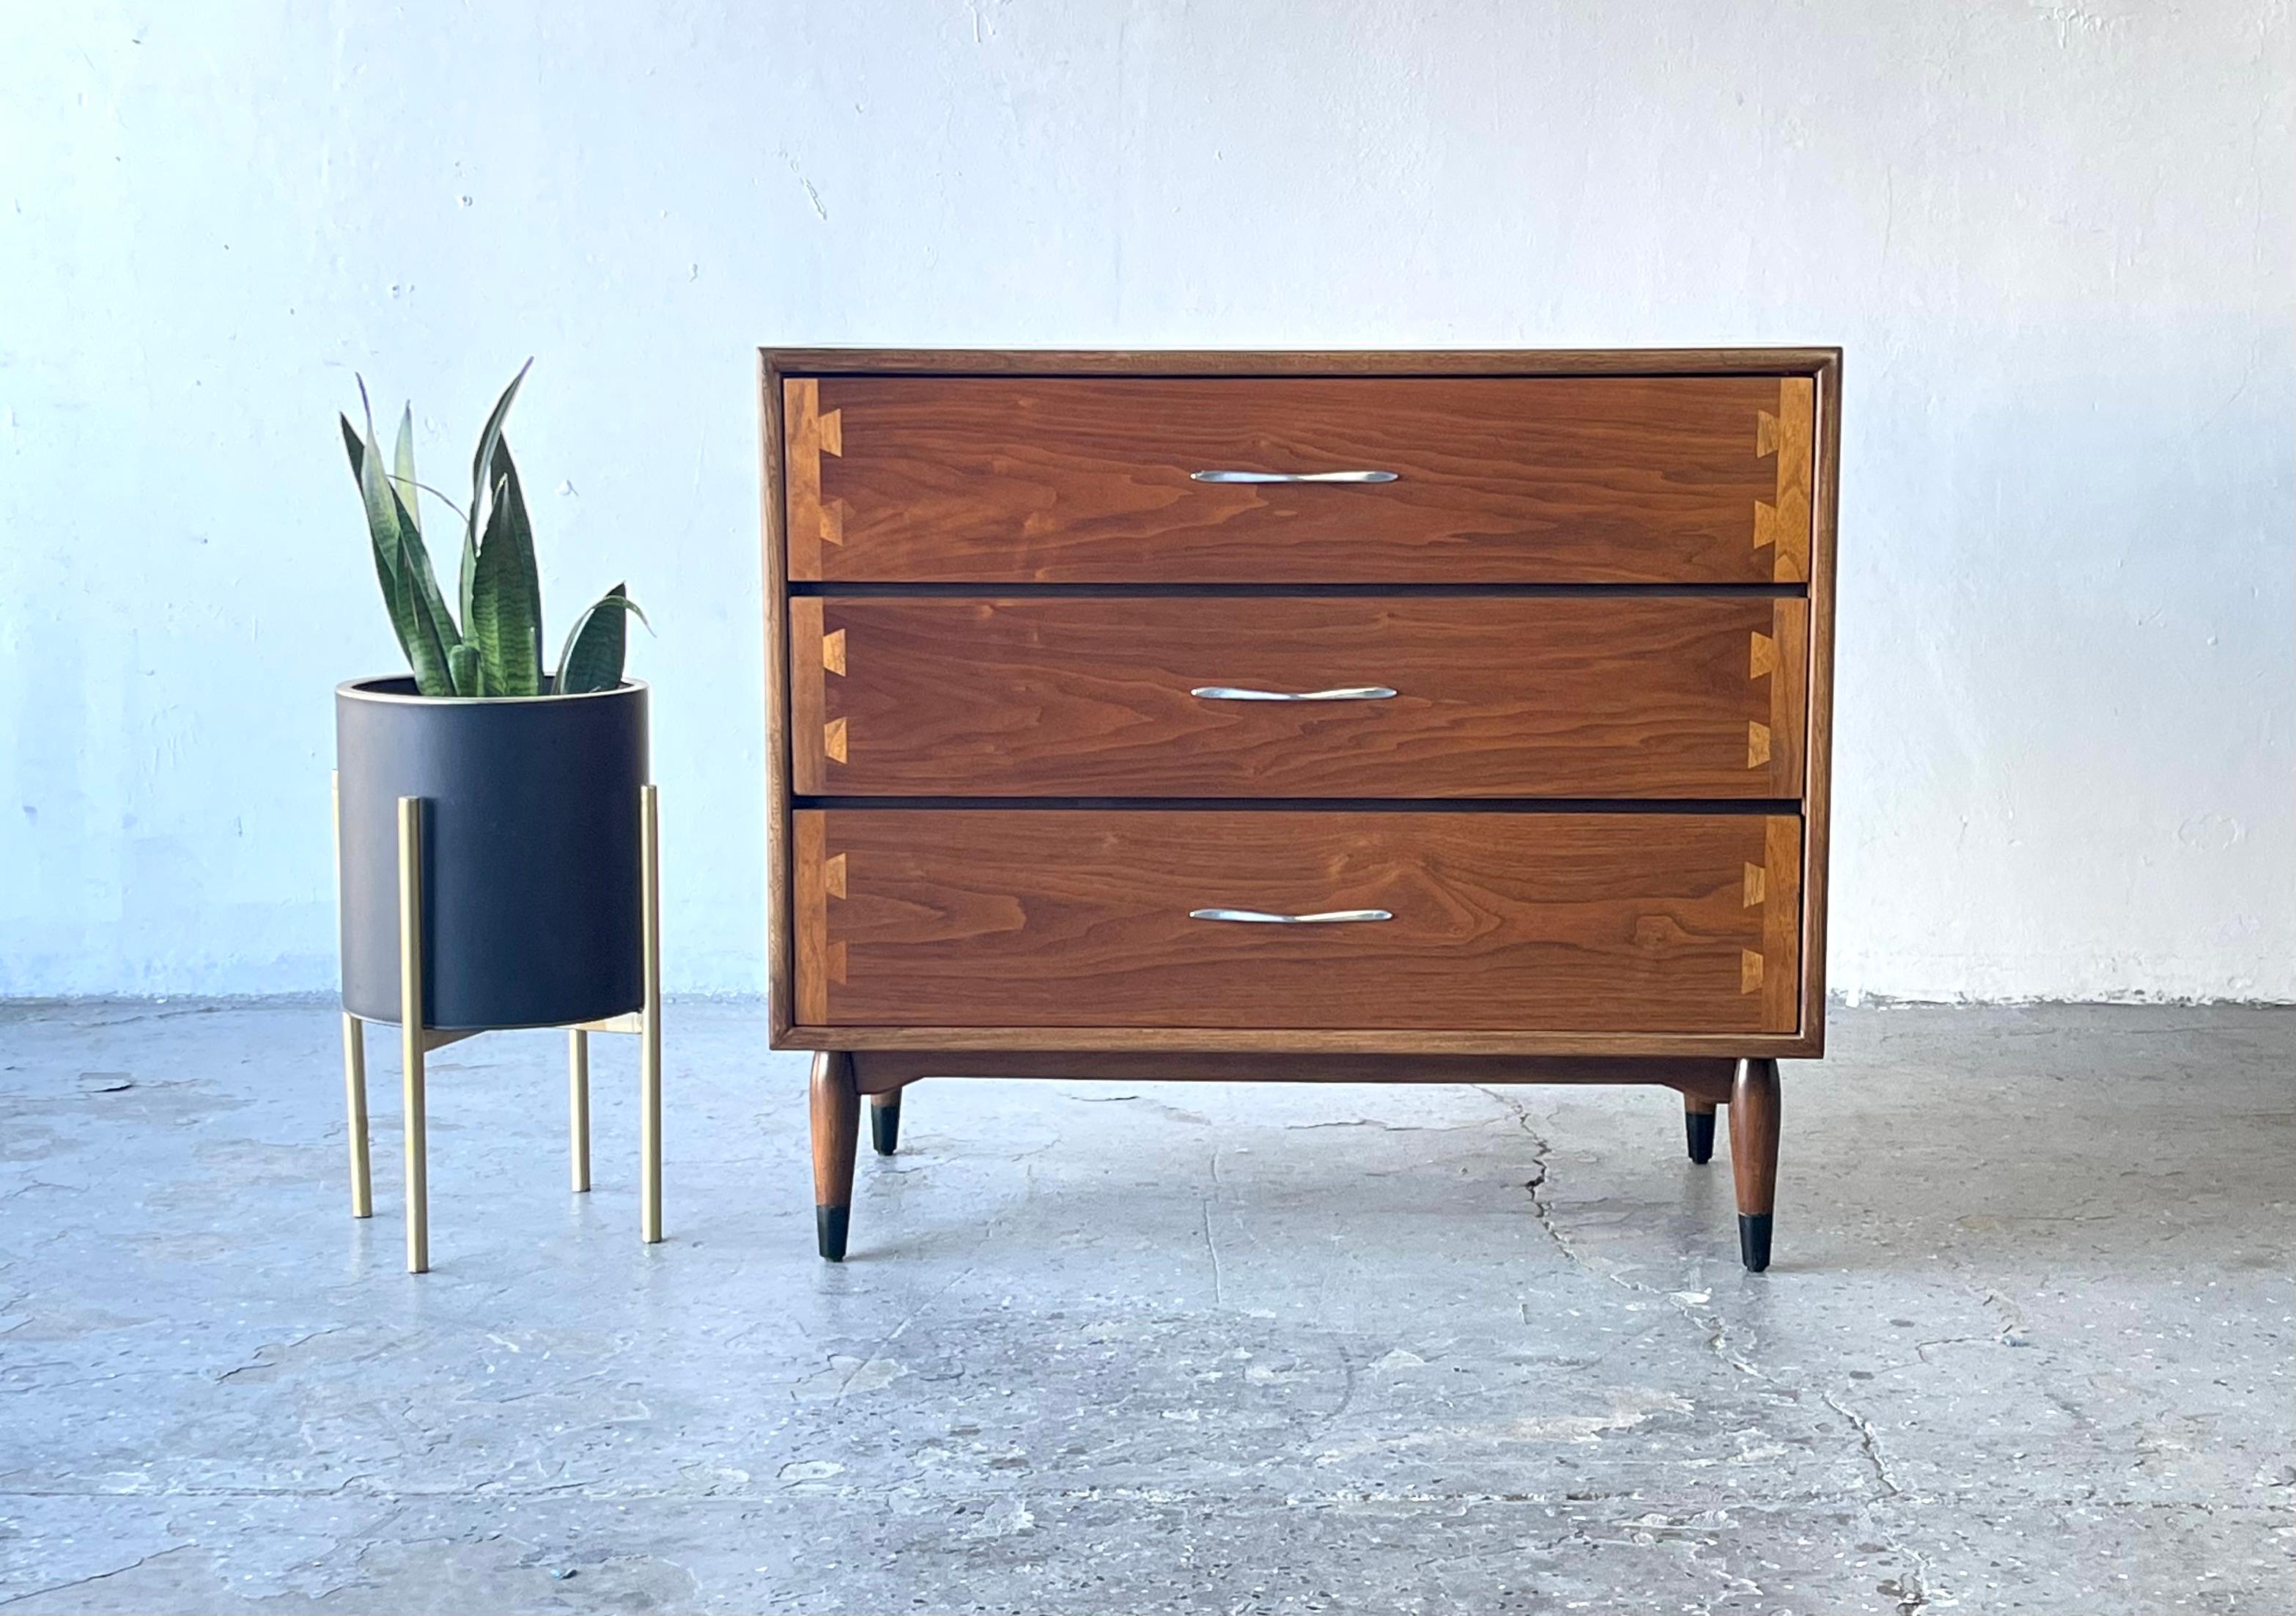 Mid-Century Modern lane acclaim bachelor chest dresser.

This is a Mid-Century Modern bachelor chest dresser from the Lane Acclaim series. It has their signature dovetailed design in the front, 3 dovetailed drawers with undulating silver pulls,